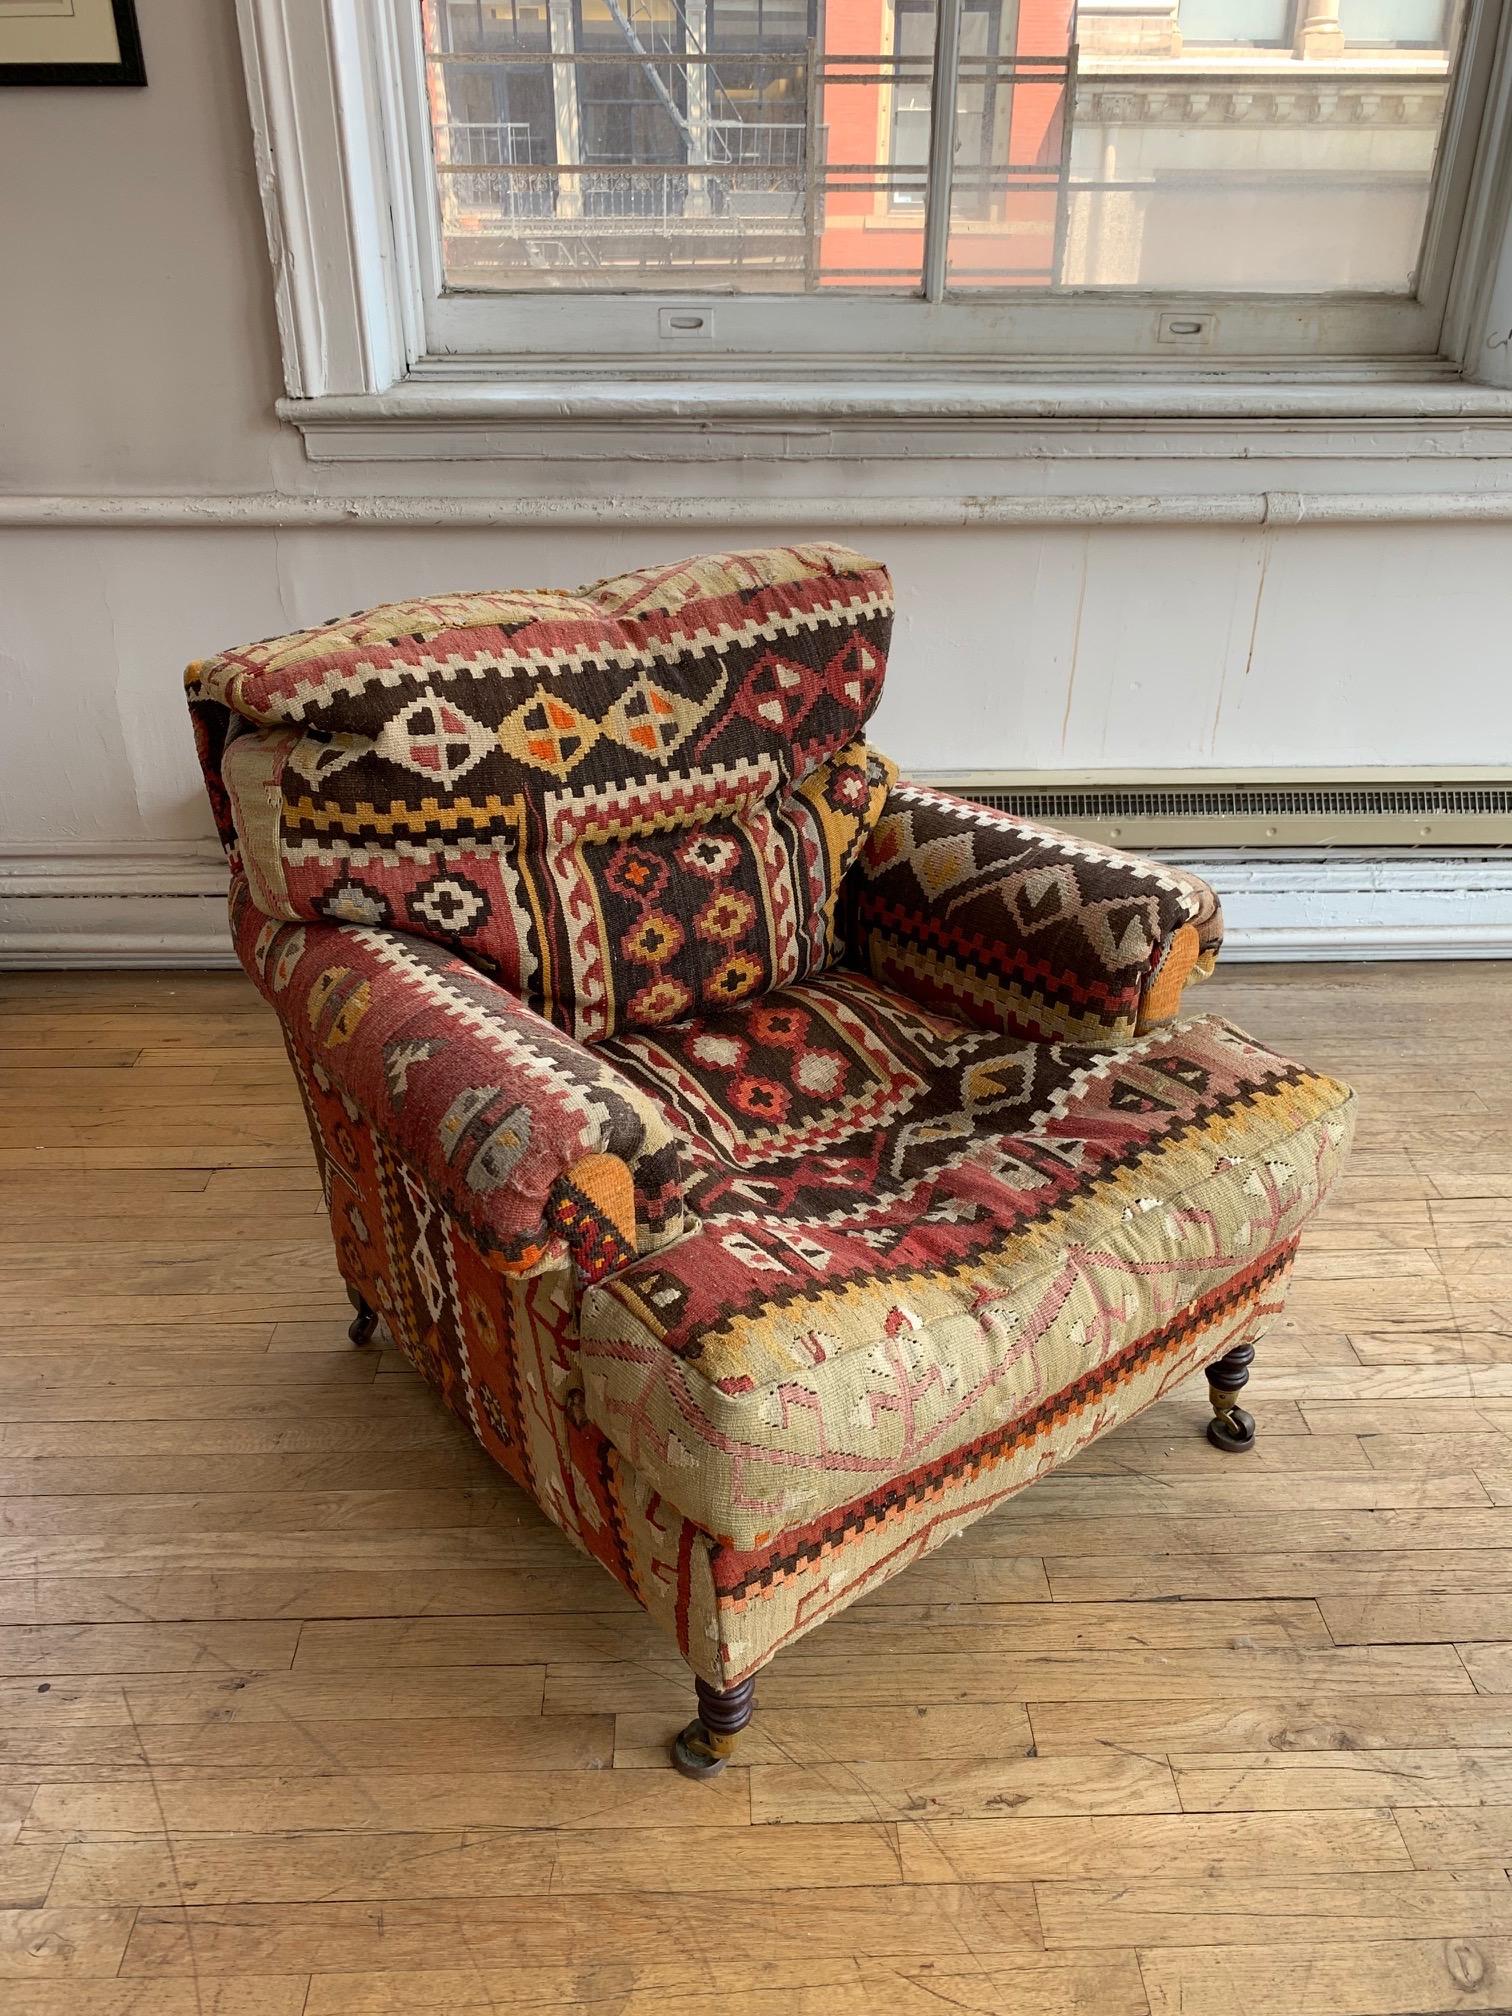 George Smith Kilim armchair
Vibrant Kilim upholstery, roll arm, on small turned front legs on casters, and back squared legs on casters. Down and feather seat and back cushions. 
c. 2000
With label George Smith Ltd.
Good overall condition, light